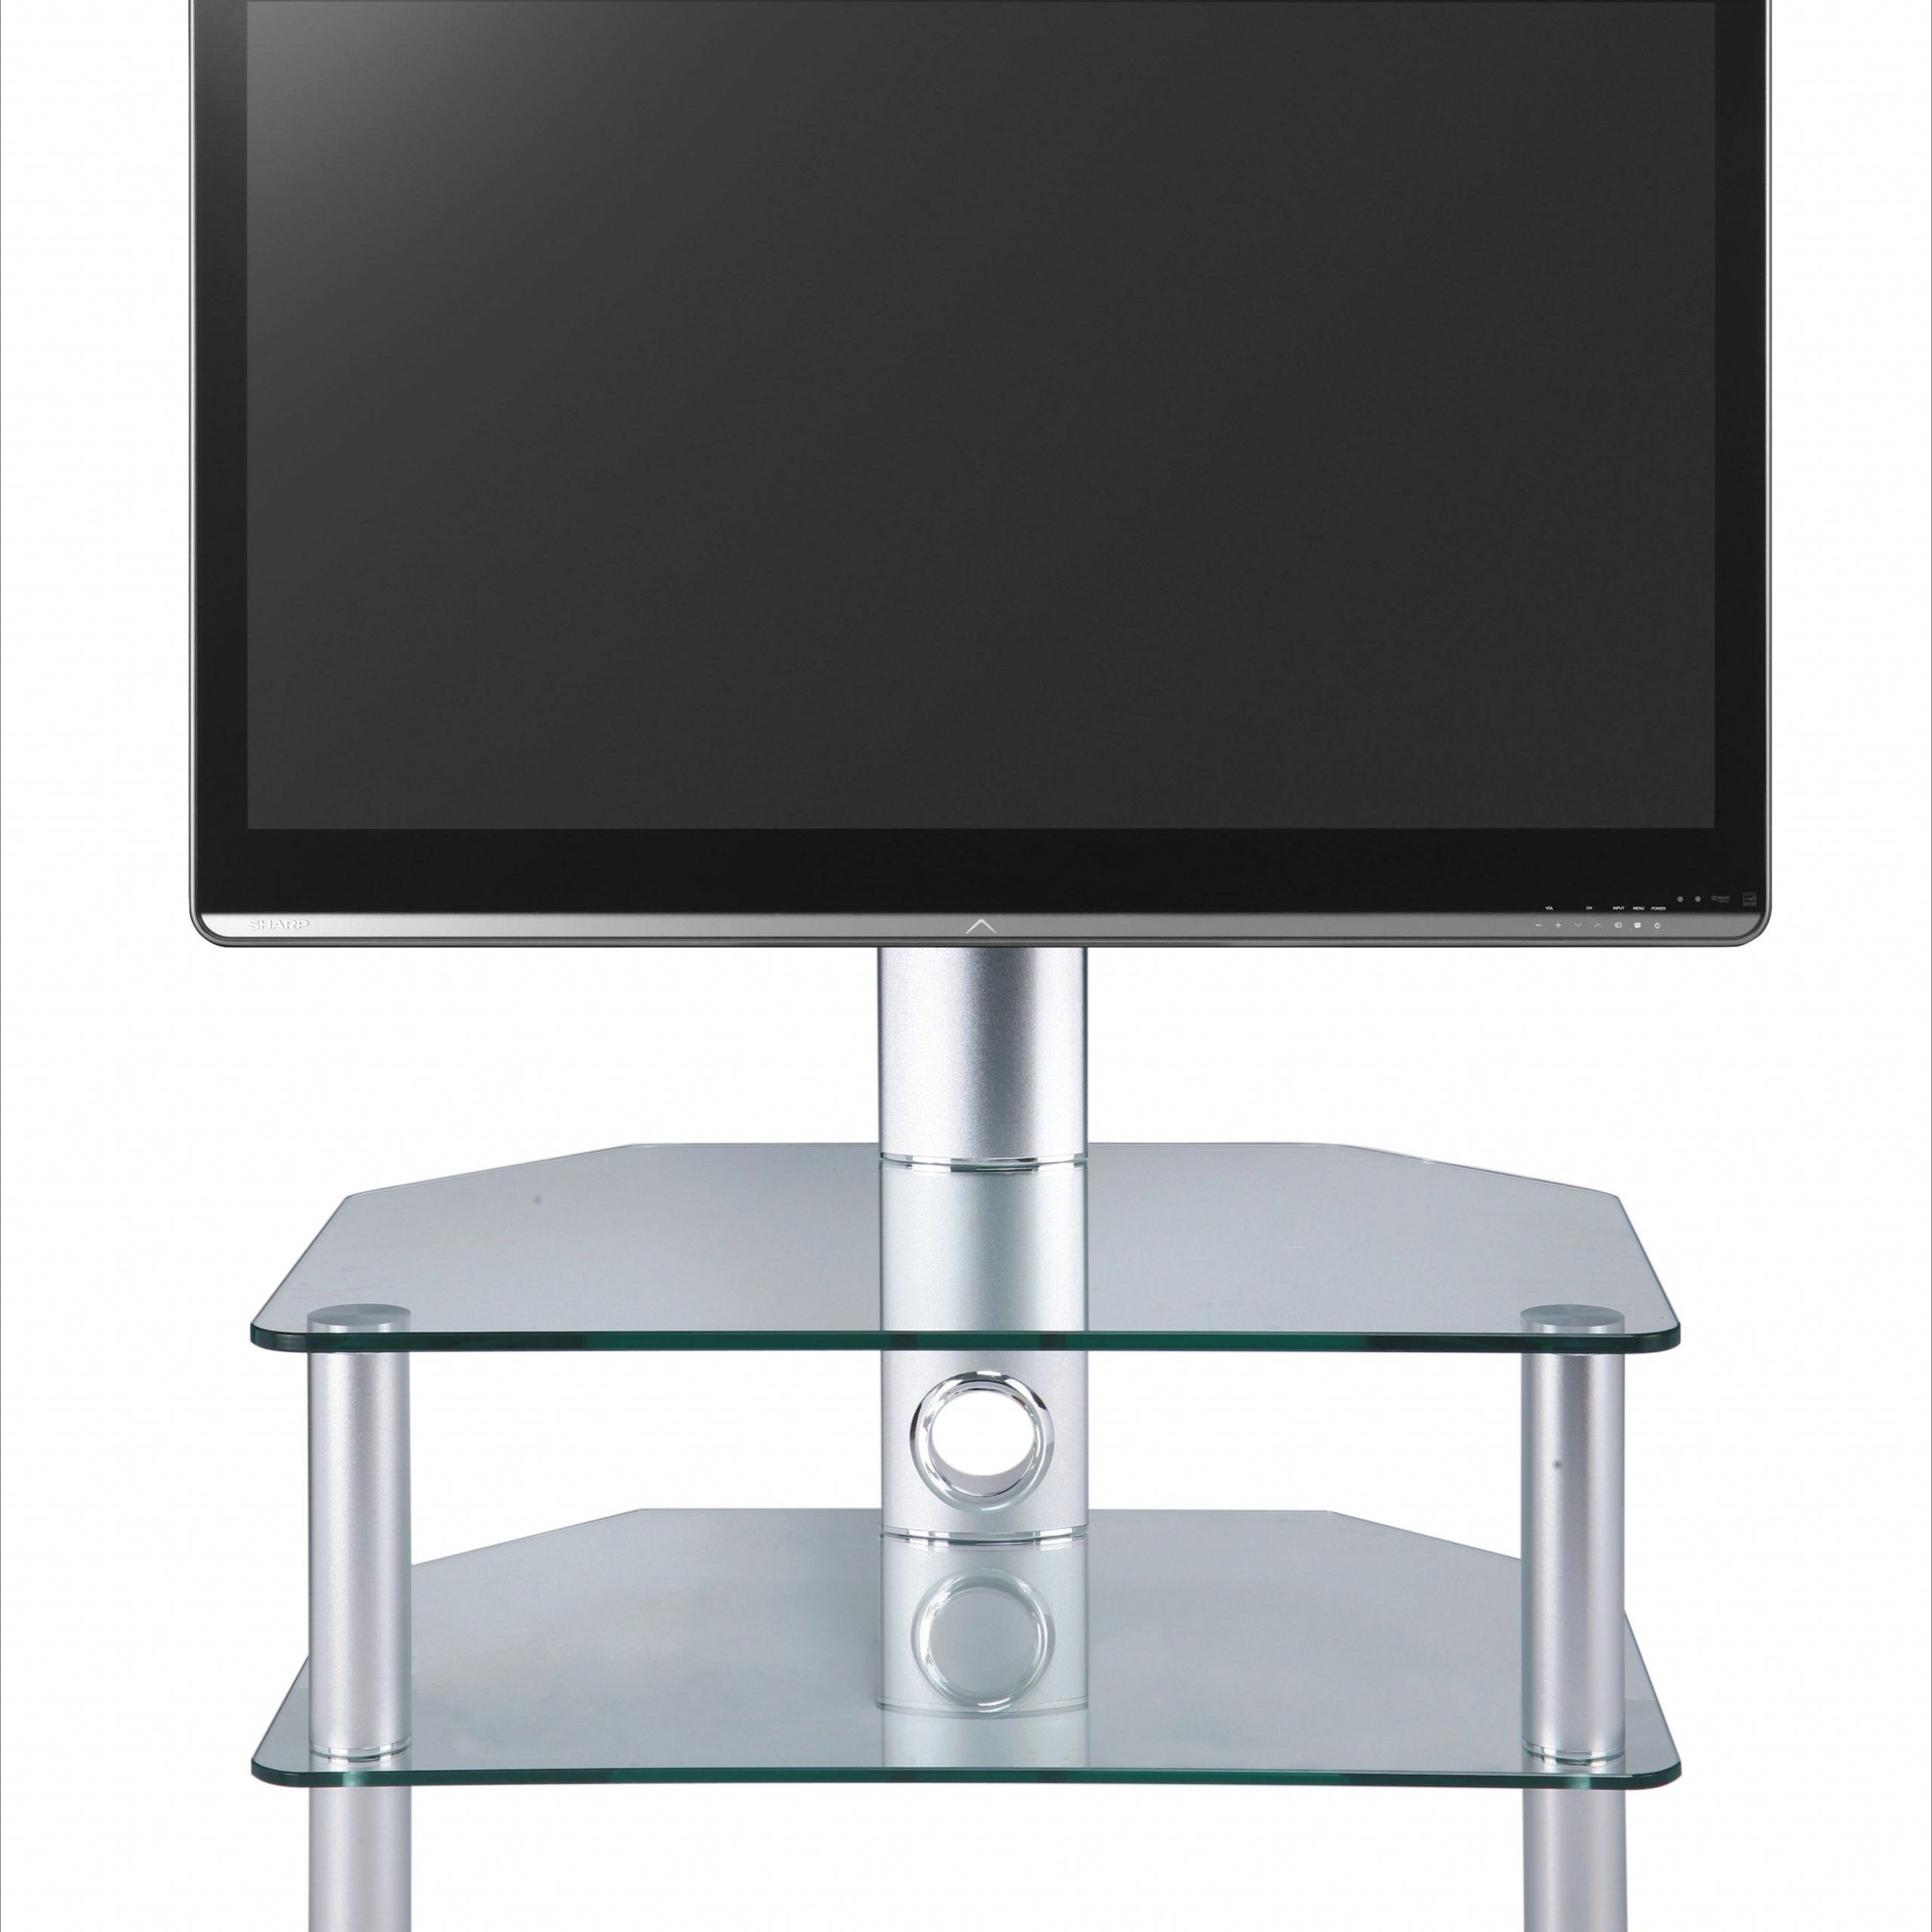 Swivel Clear Glass Cantilever Tv Stand Up To 37"stil Pertaining To Swivel Black Glass Tv Stands (View 12 of 15)